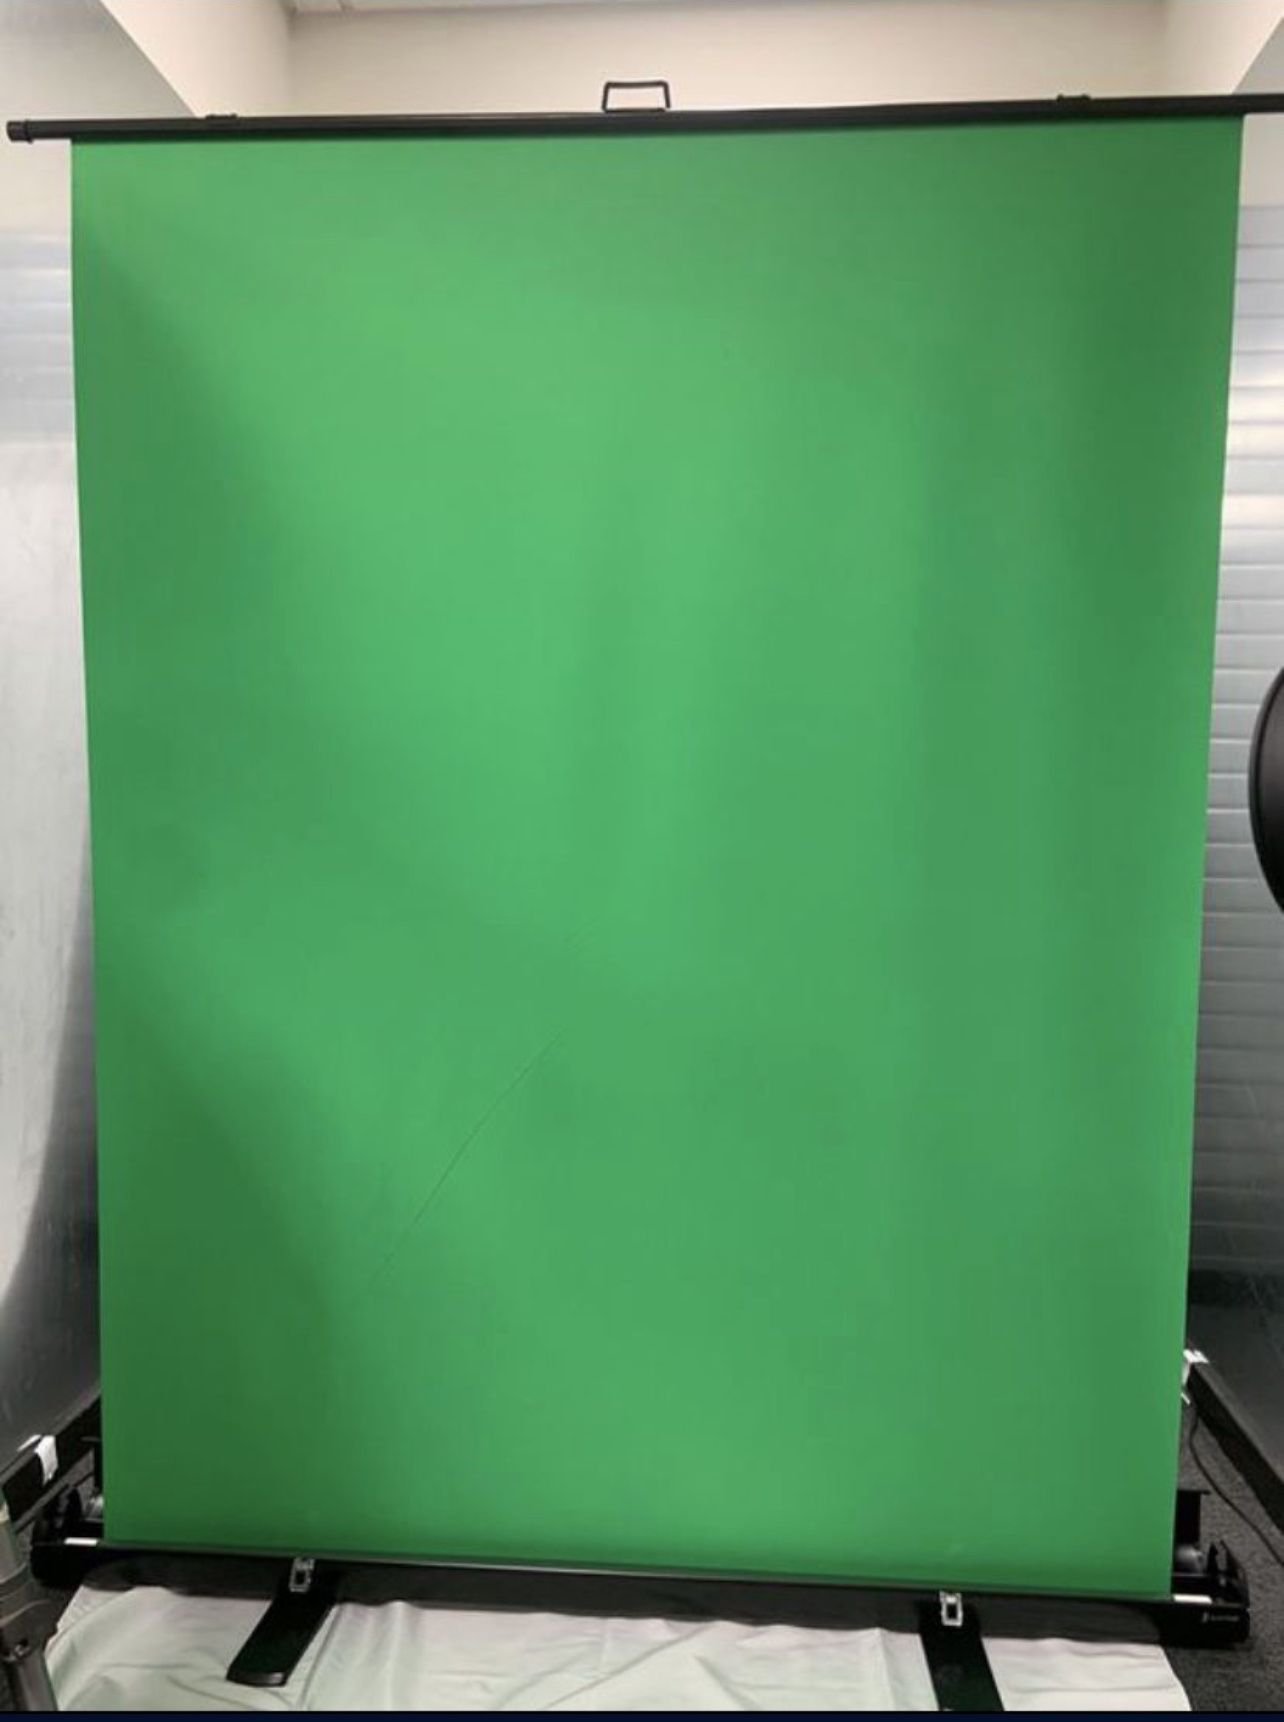 5ft. (W) x 6ft. (H) Collapsible and Retractable Green Chromakey Screen with Built-in Aluminum Case, Photo Video Studio